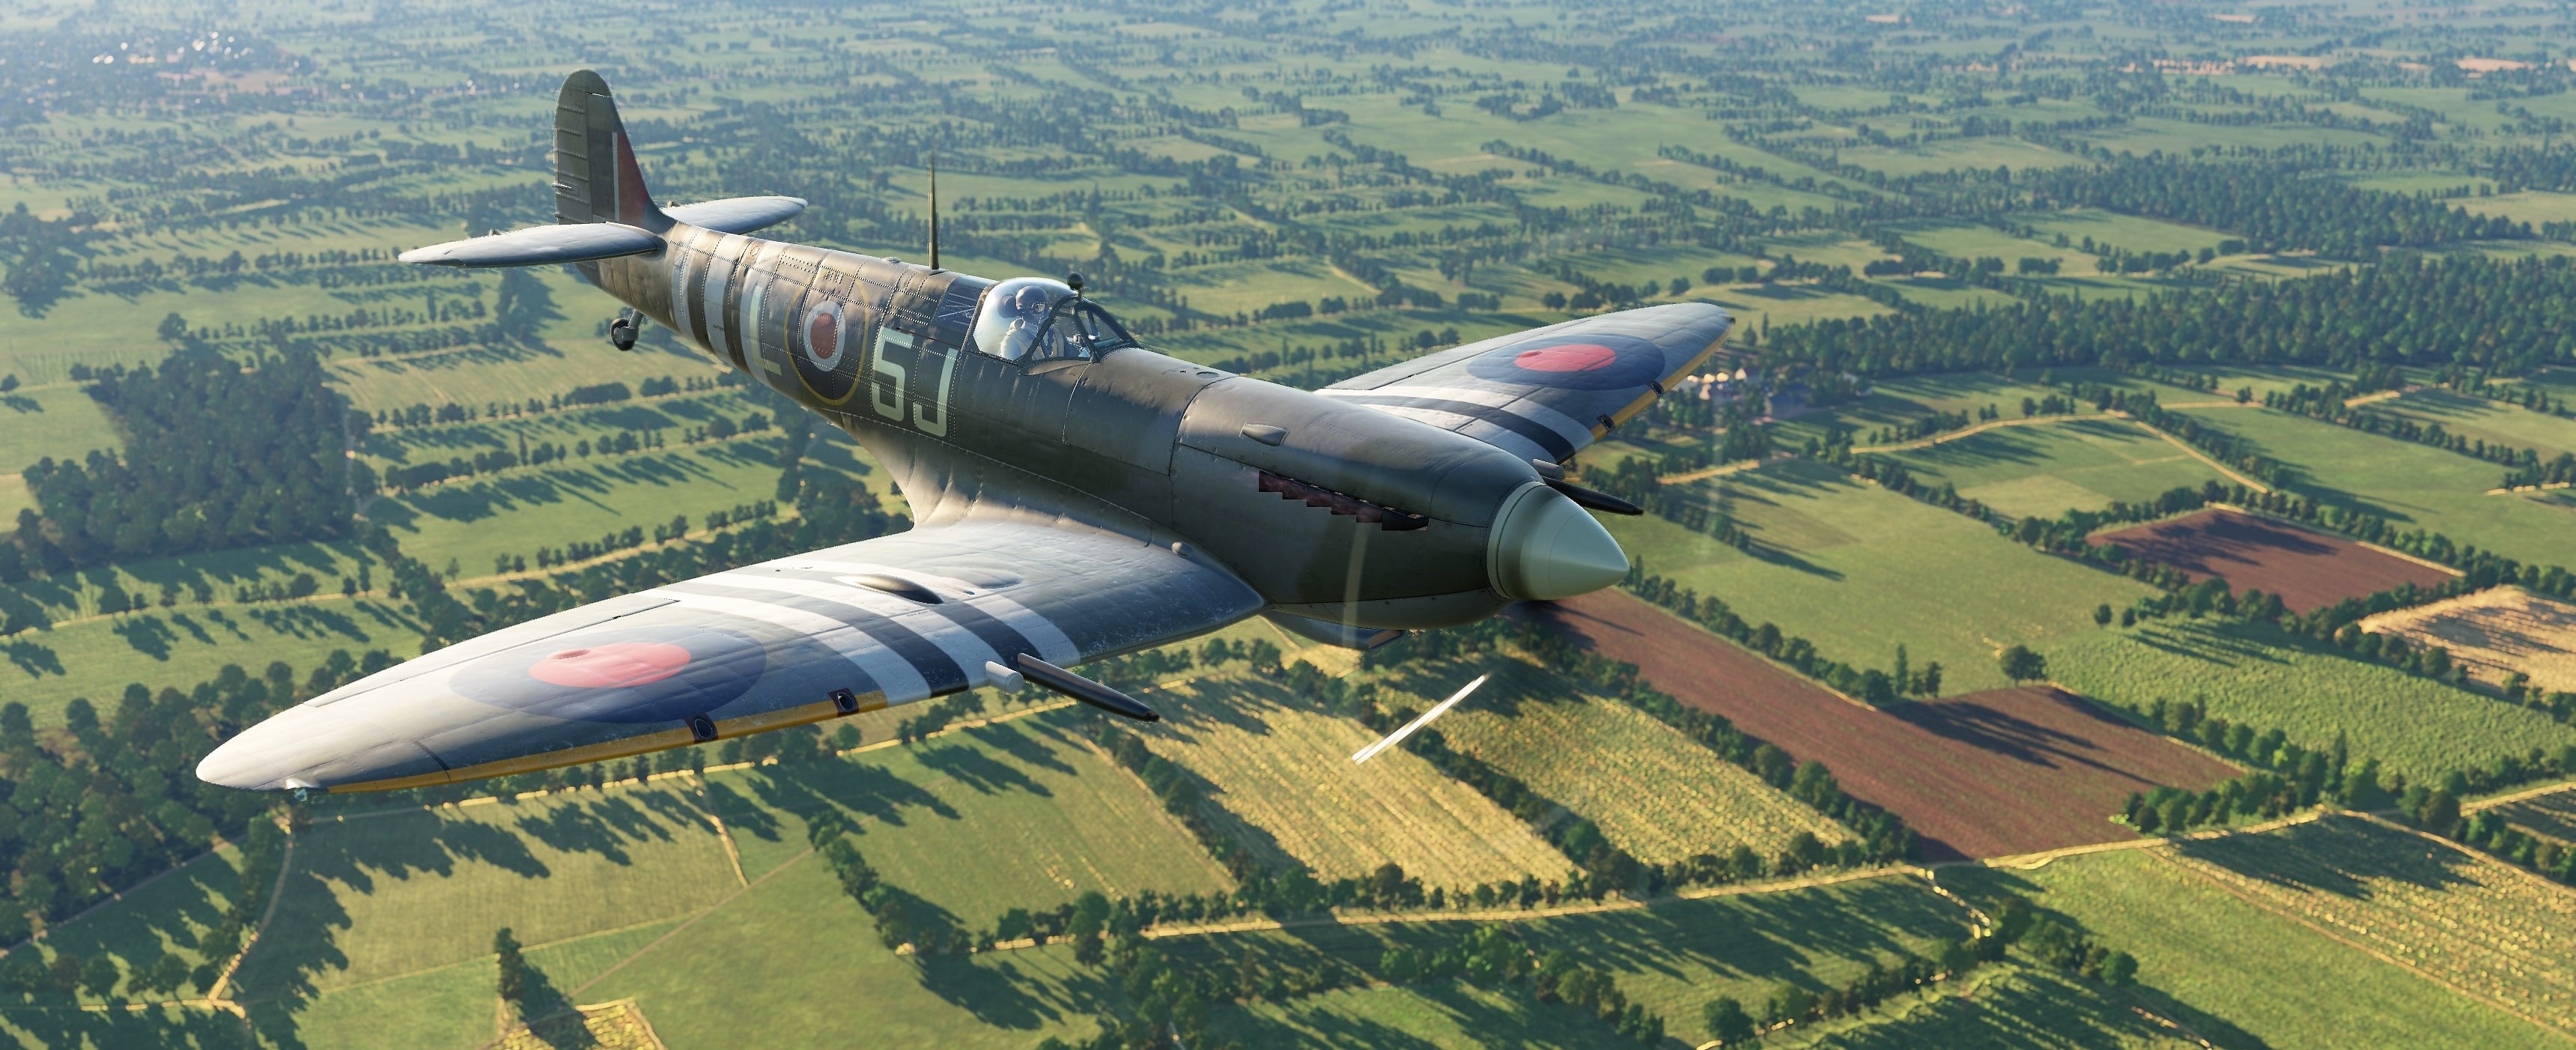 Spitfire wallpapers, DCS flying, Historic aircraft, HD pictures, 3440x1410 Dual Screen Desktop